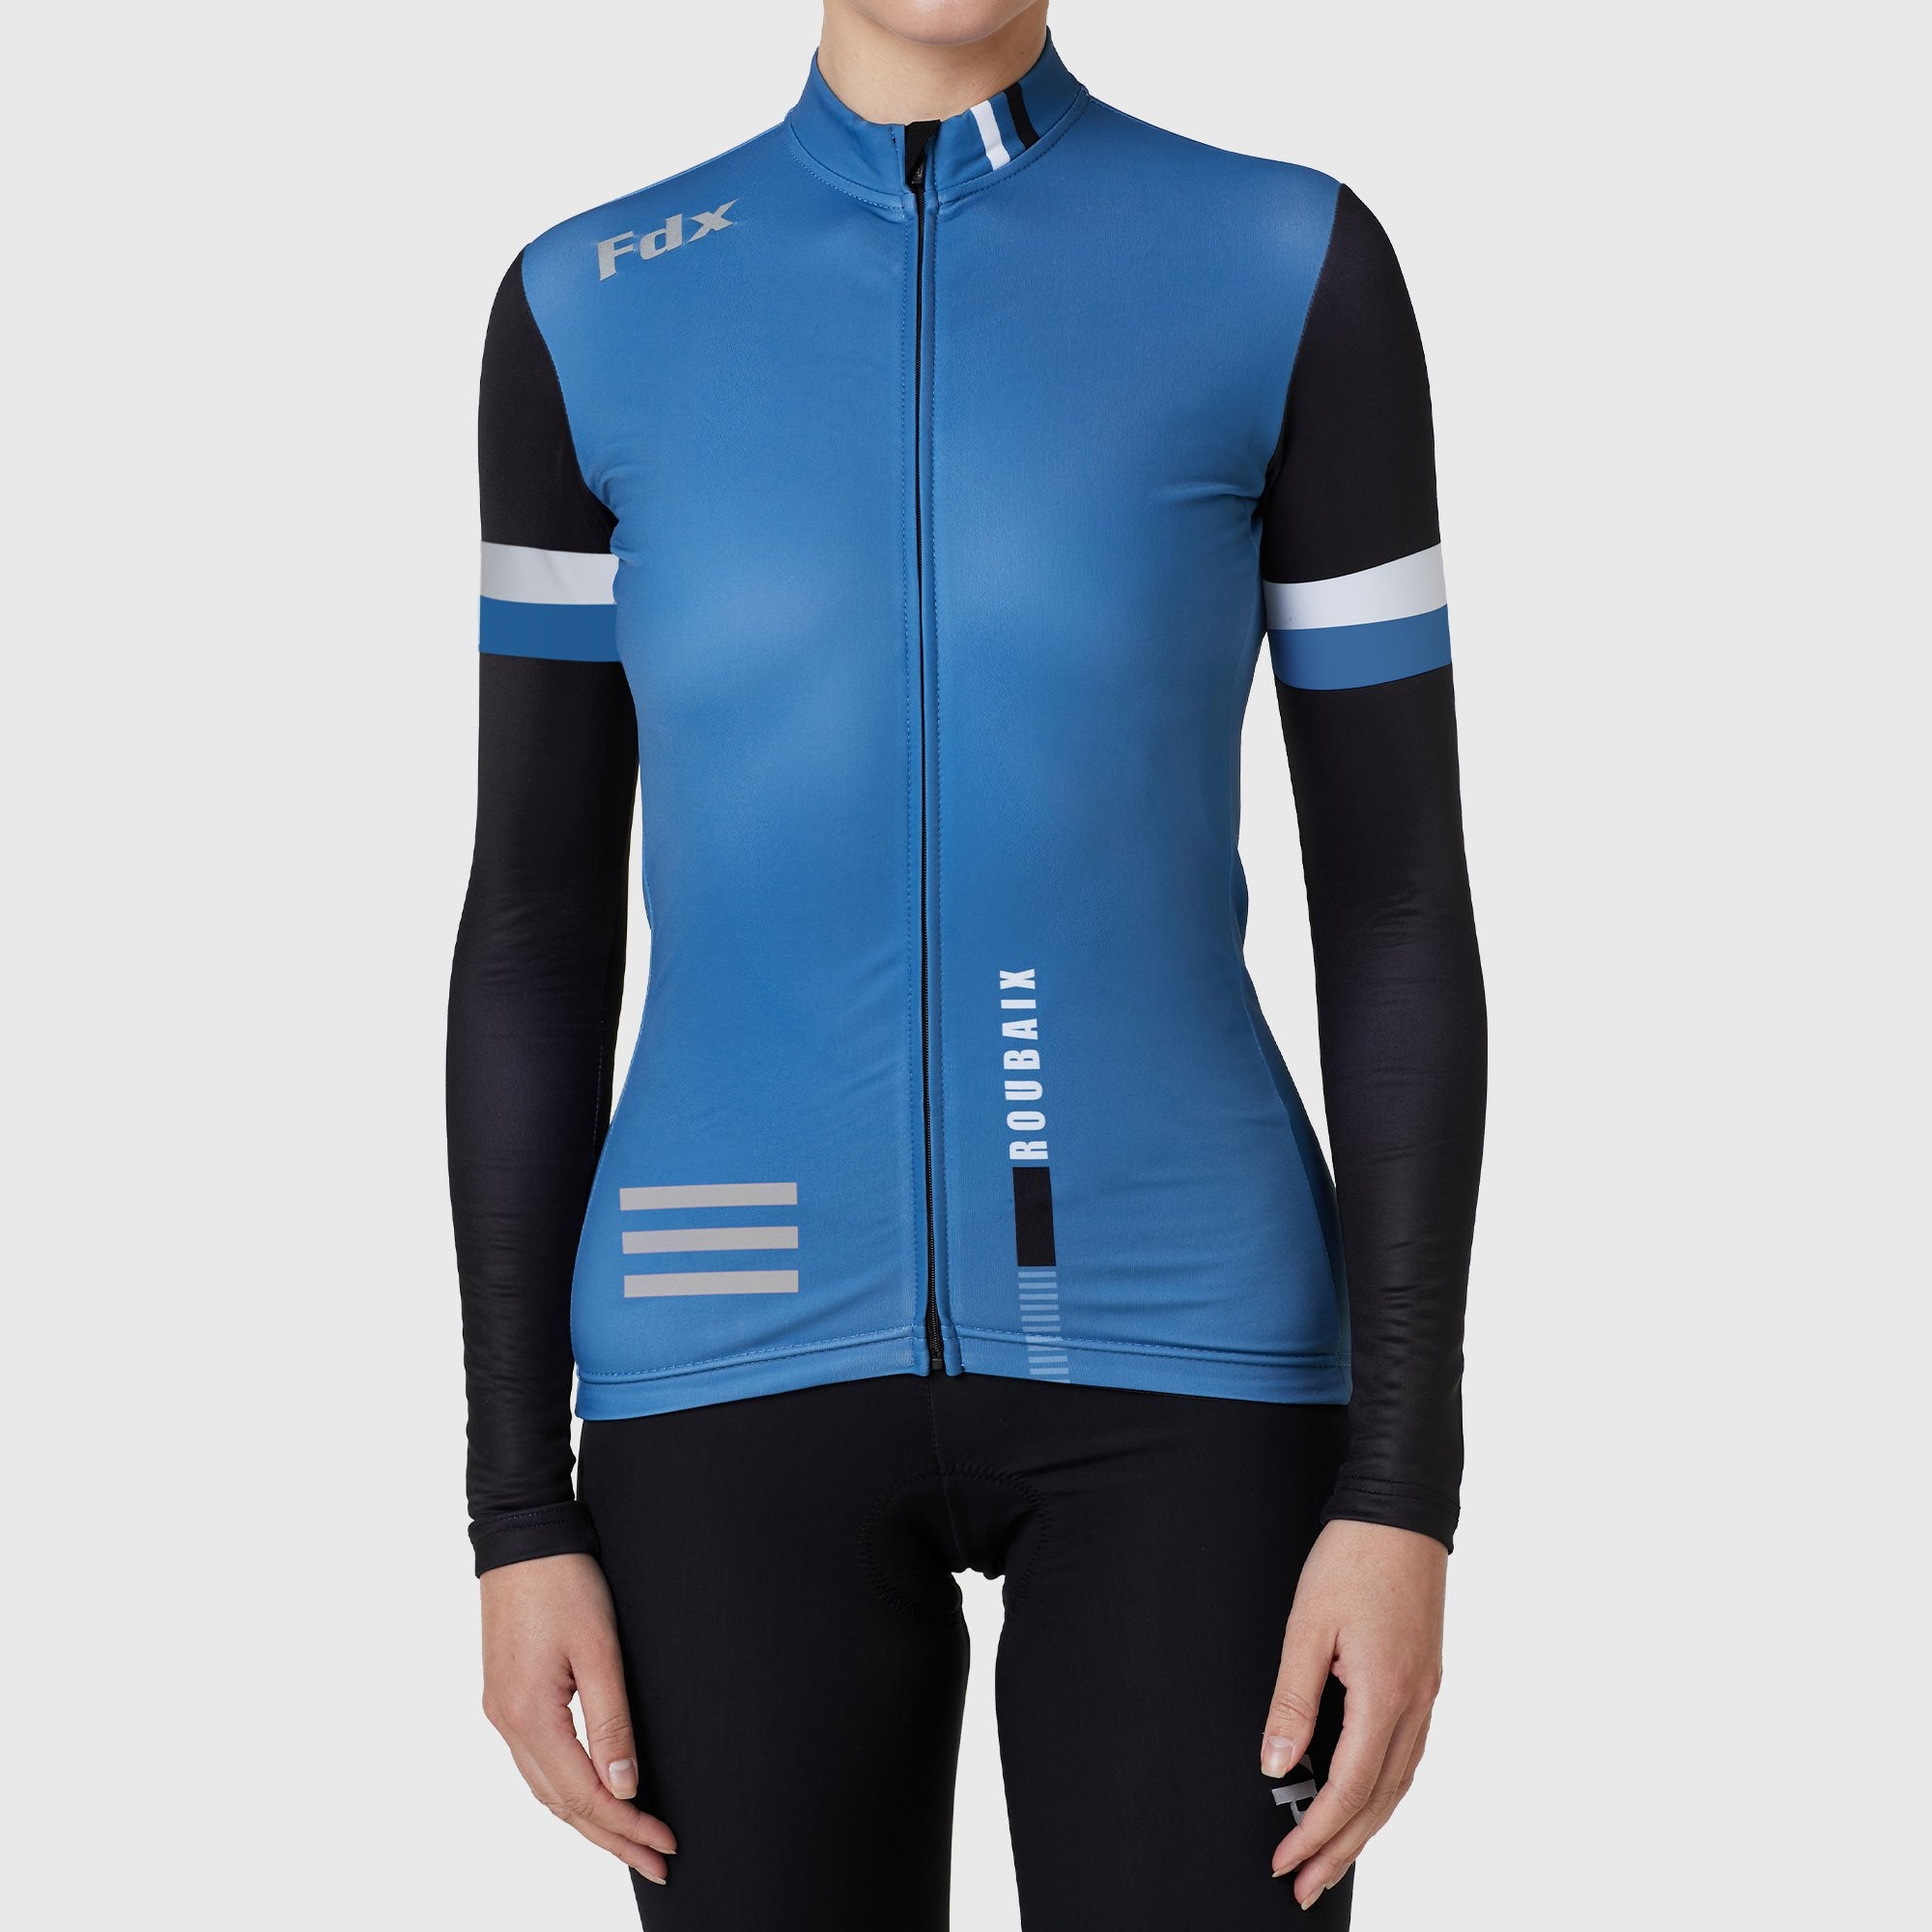 Fdx Women's Set Limited Edition Thermal Roubaix Long Sleeve Cycling Jersey & Bib Tights - Blue